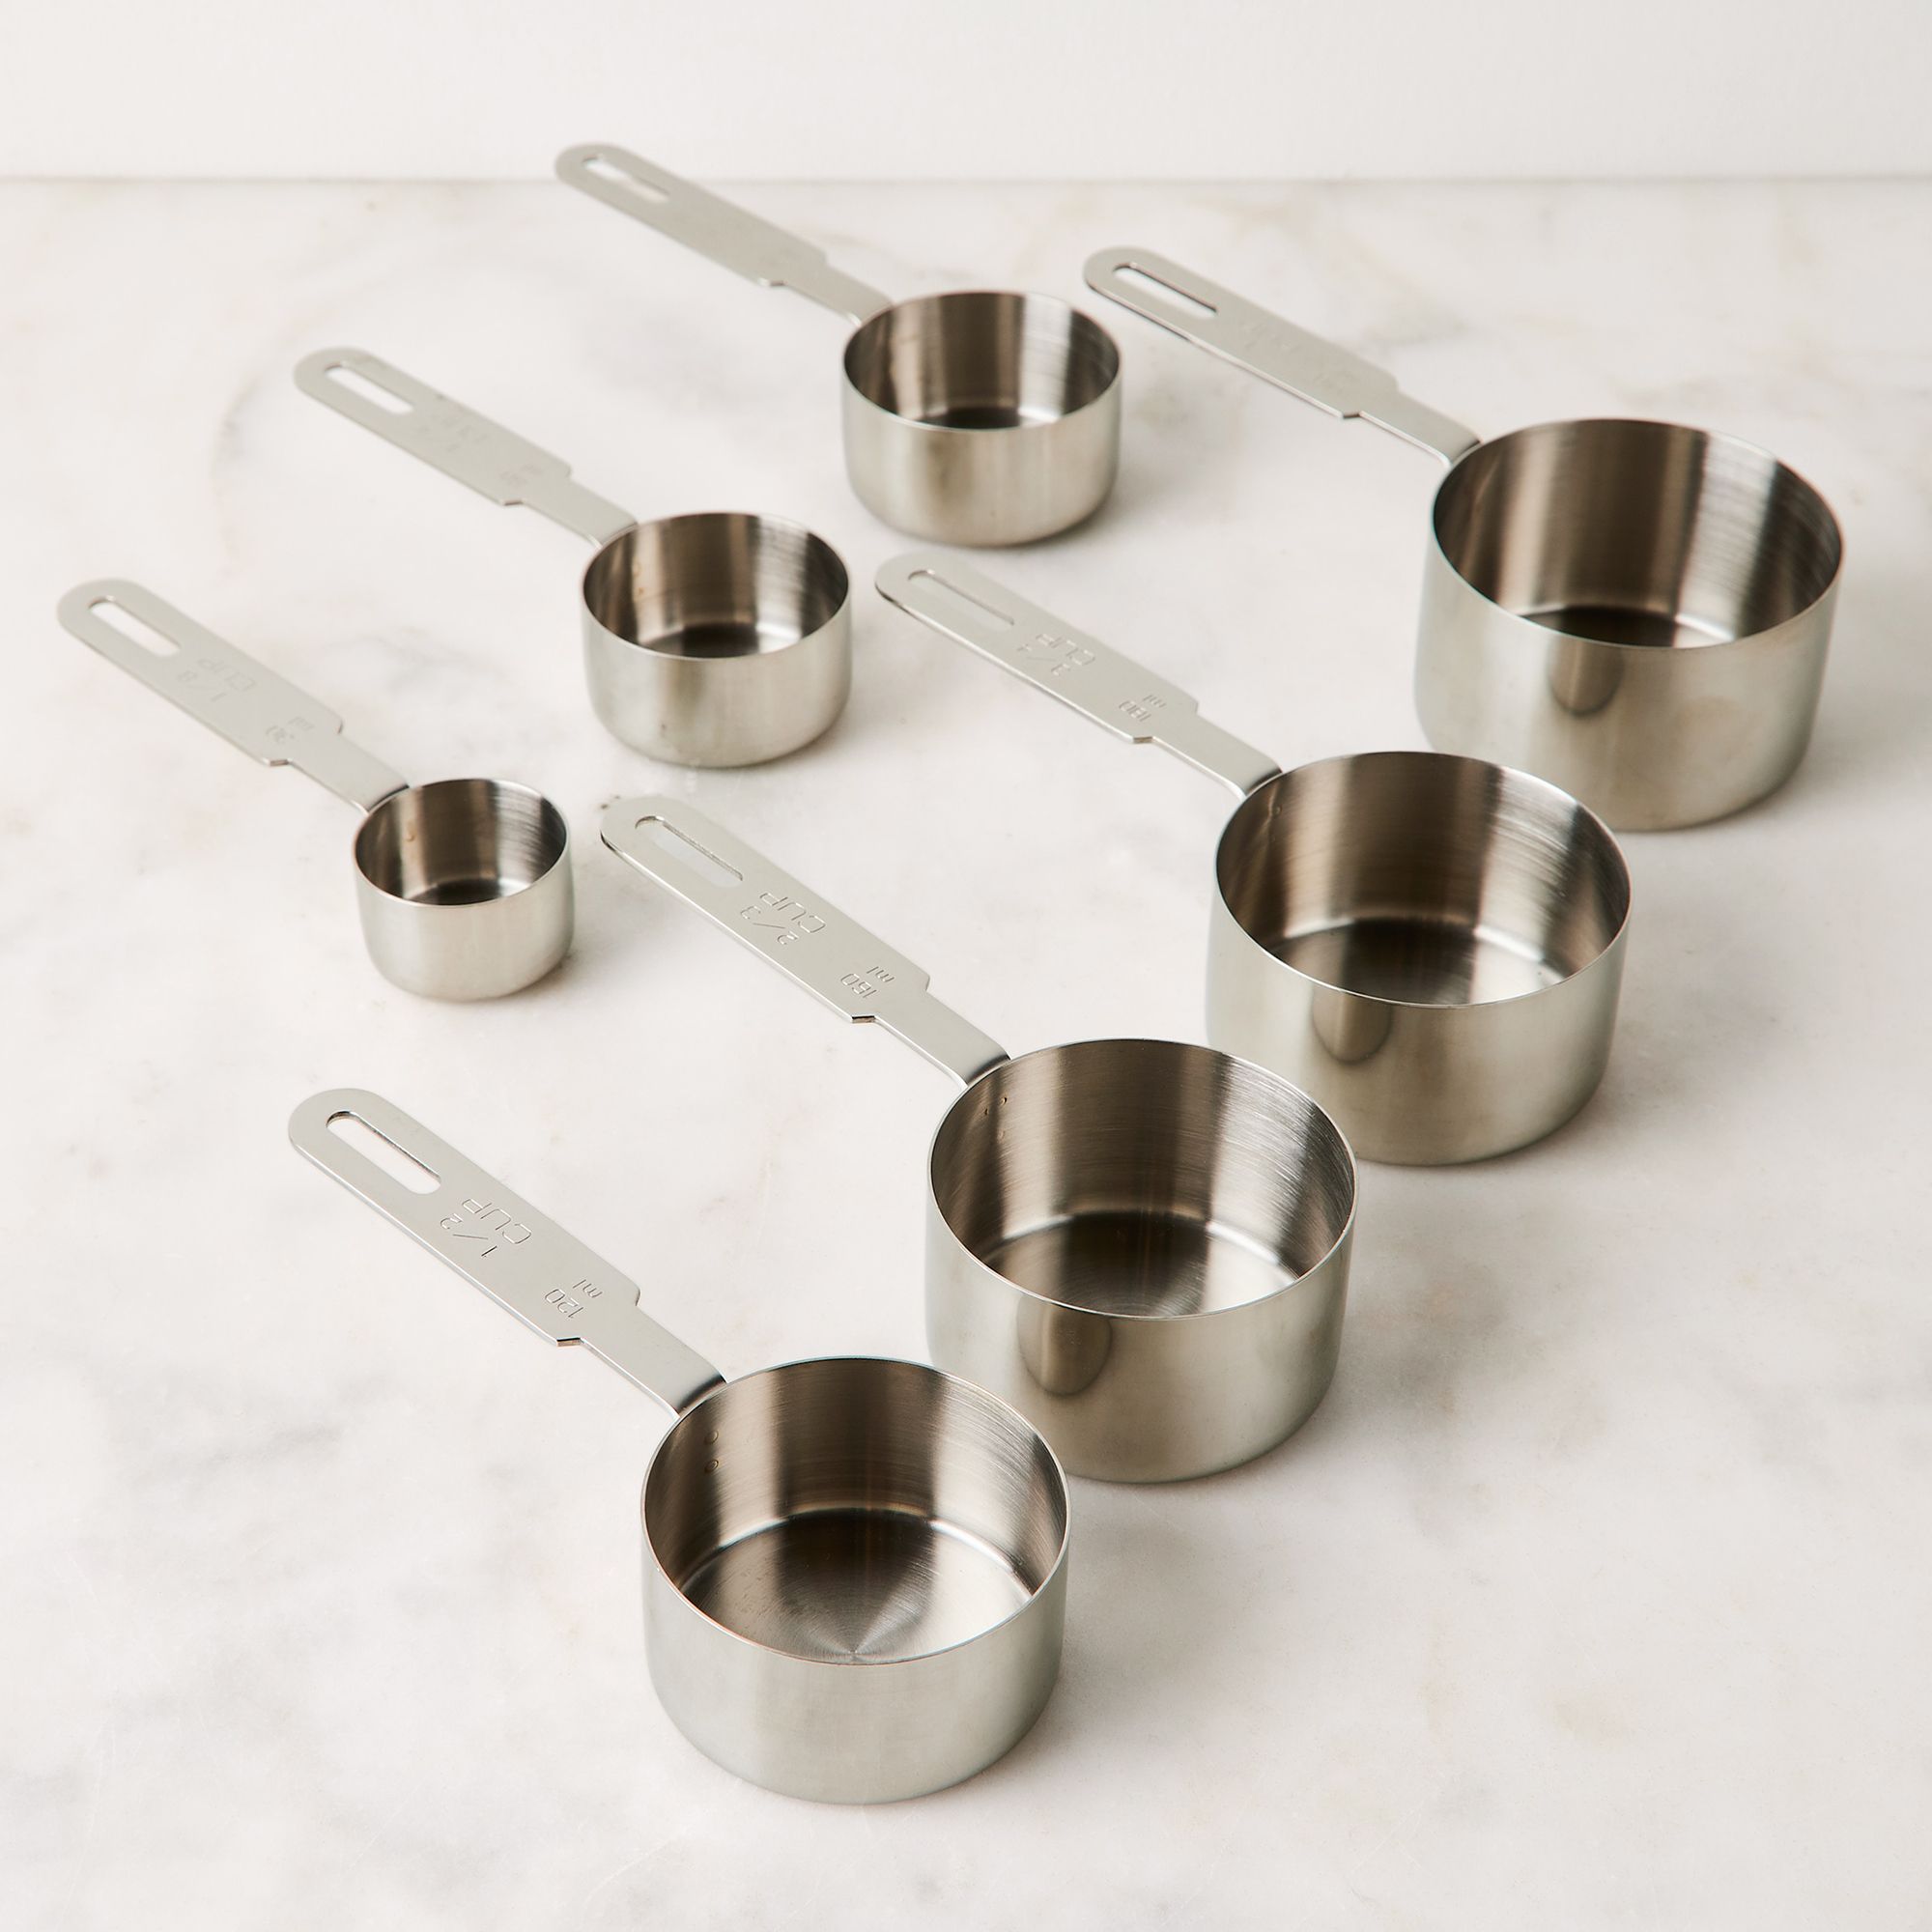 9 PC Nested Measuring Cup Set – R & B Import